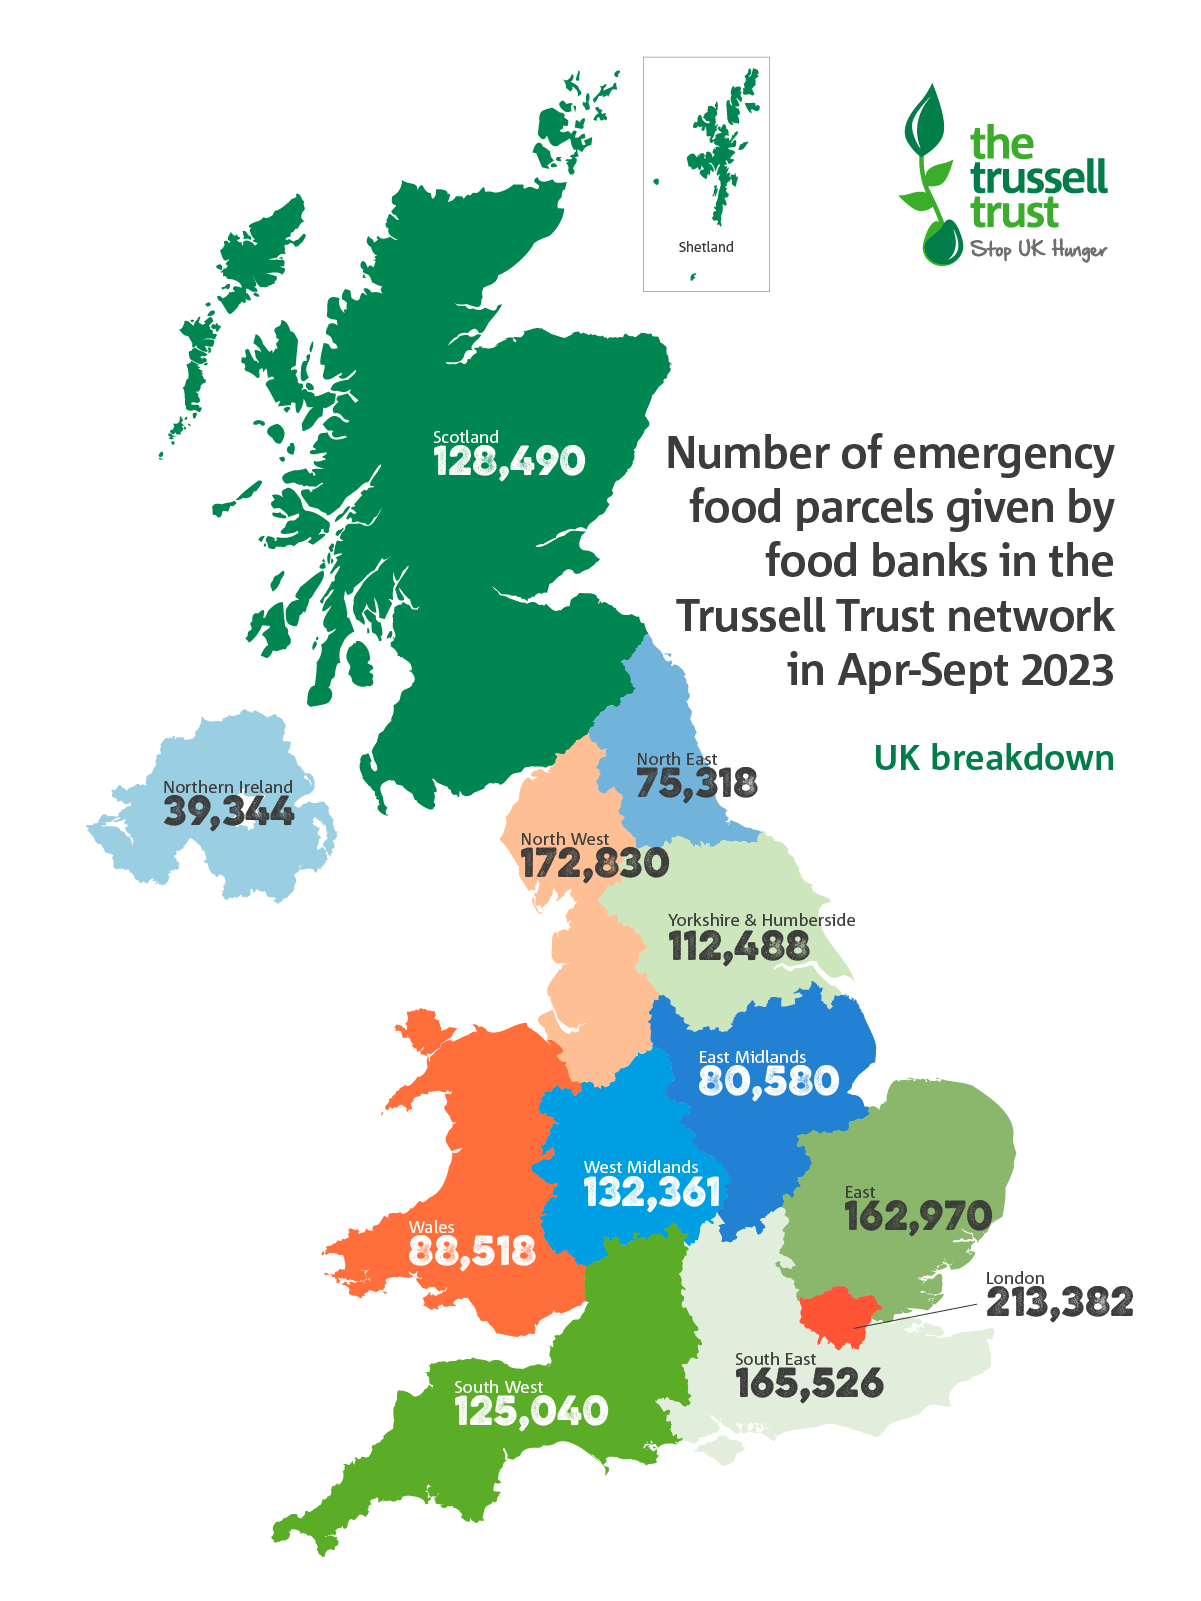 Map of the UK showing the number of emergency food parcels by region